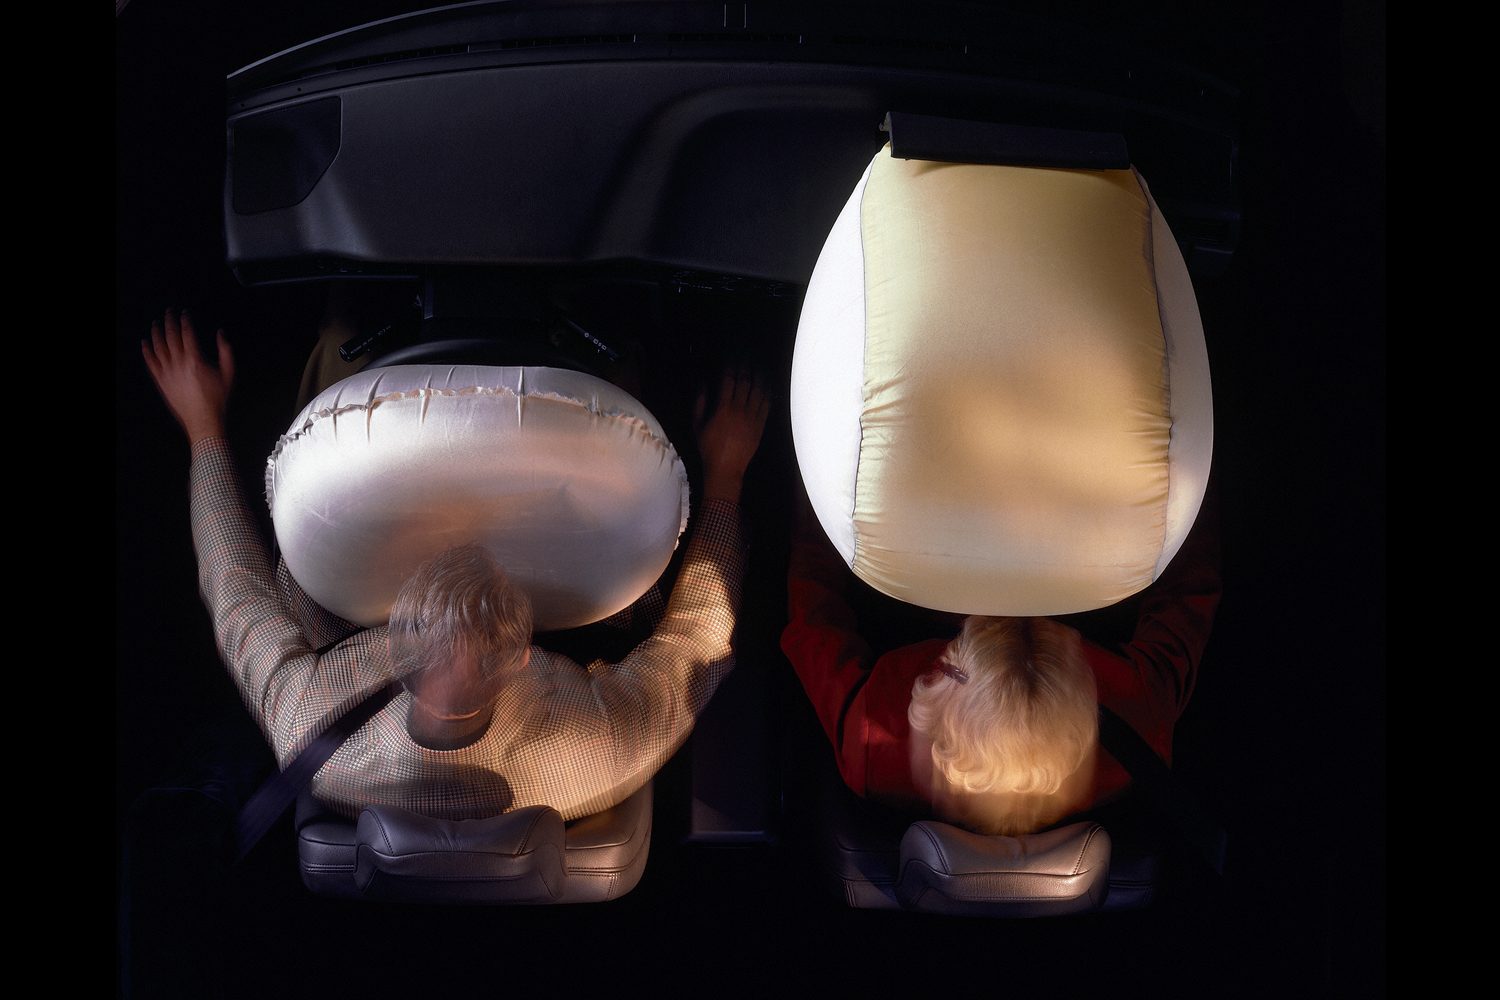 Story of road safety: airbags